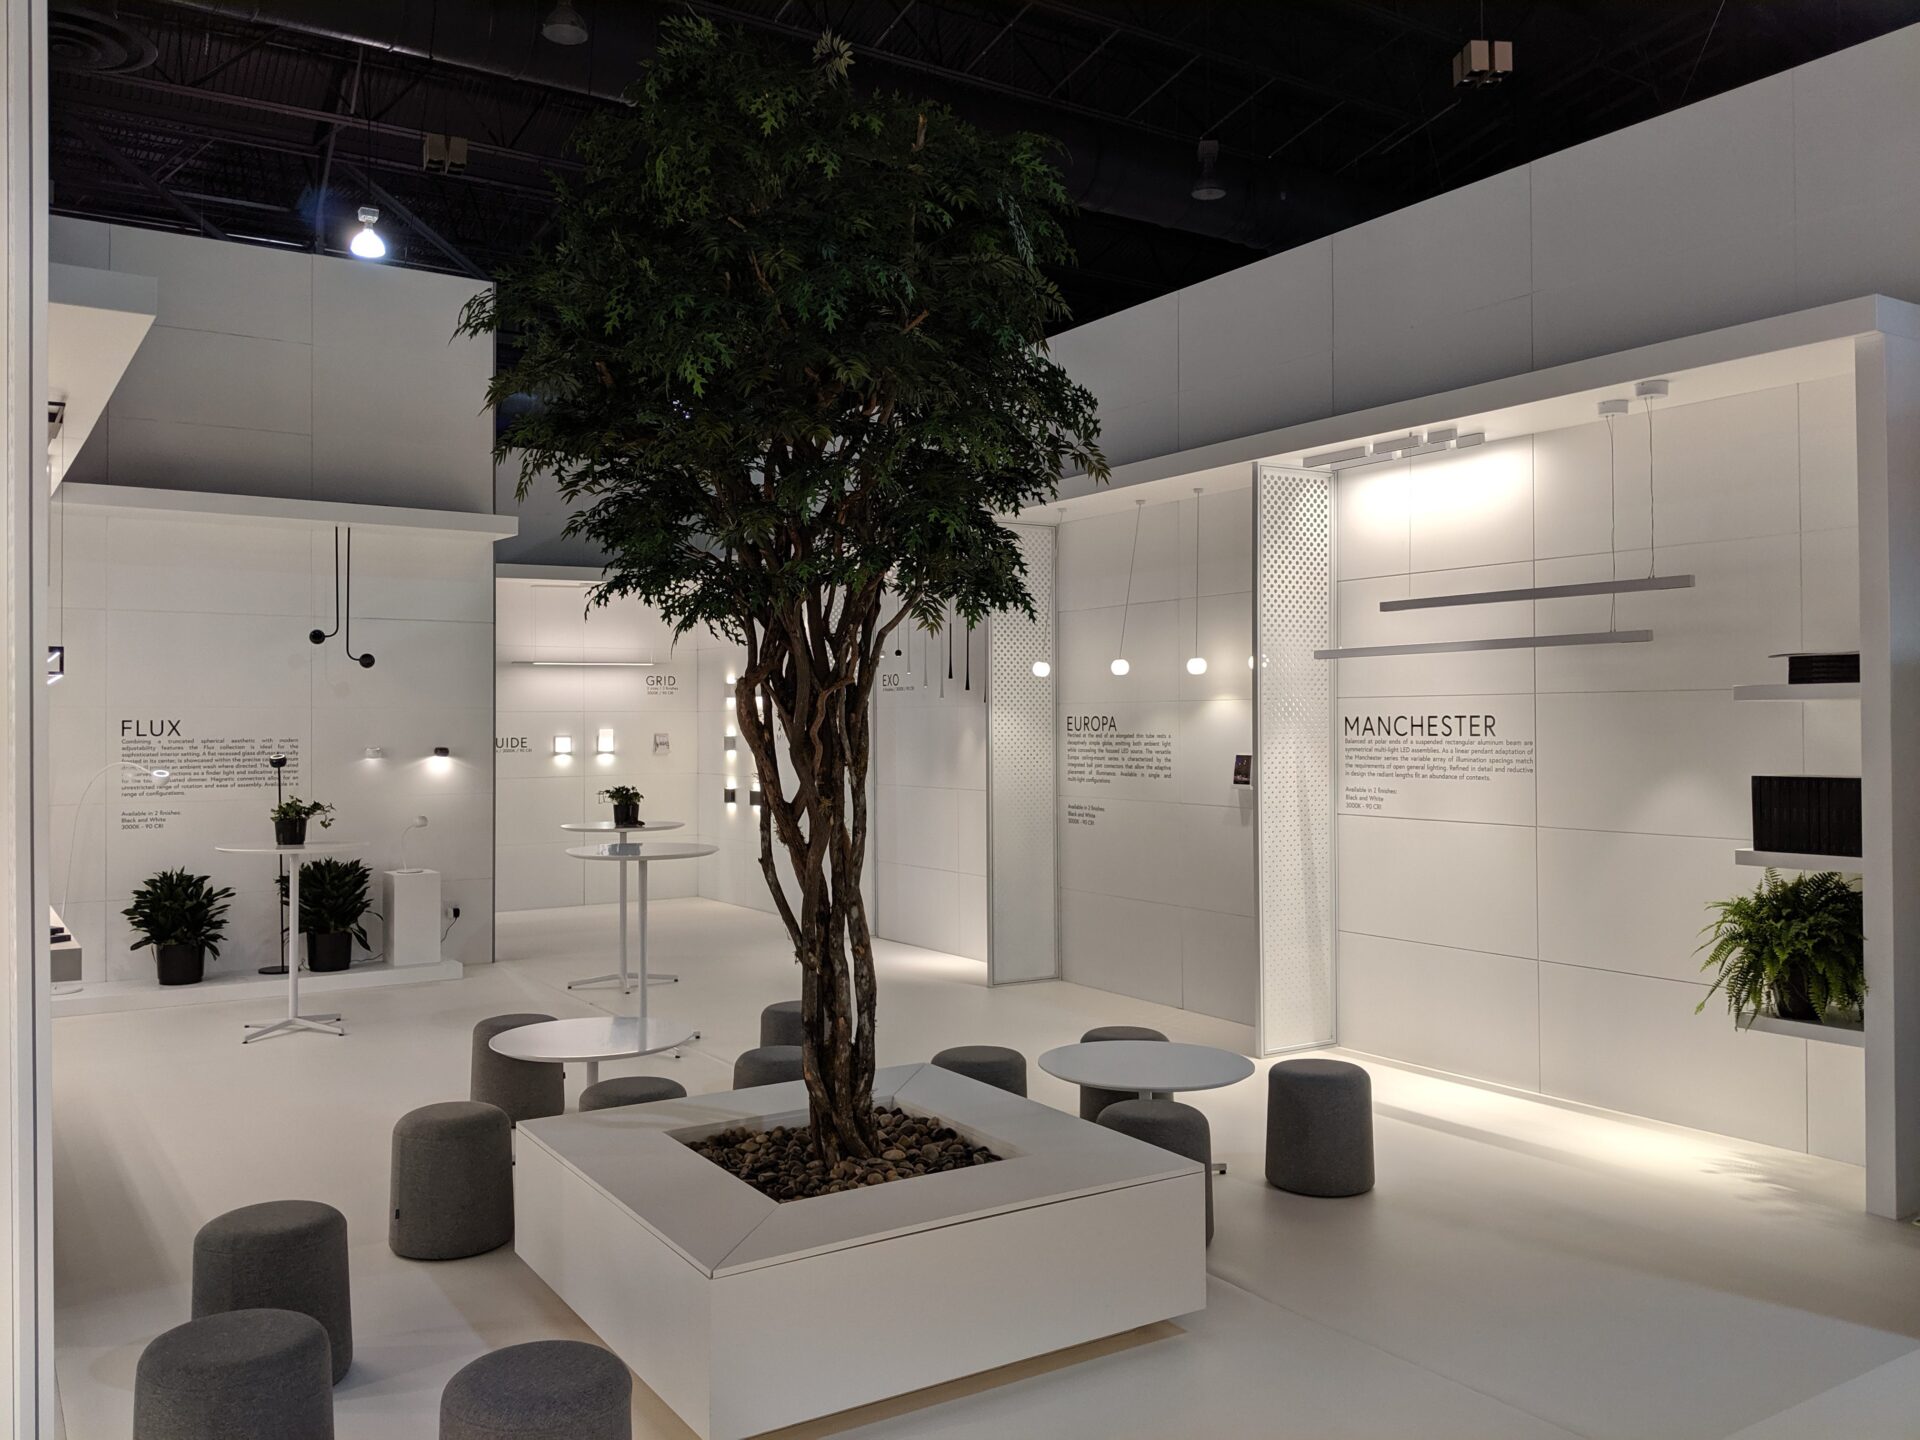 Kuzco trade show booth with greenery and upscale fabric seeting